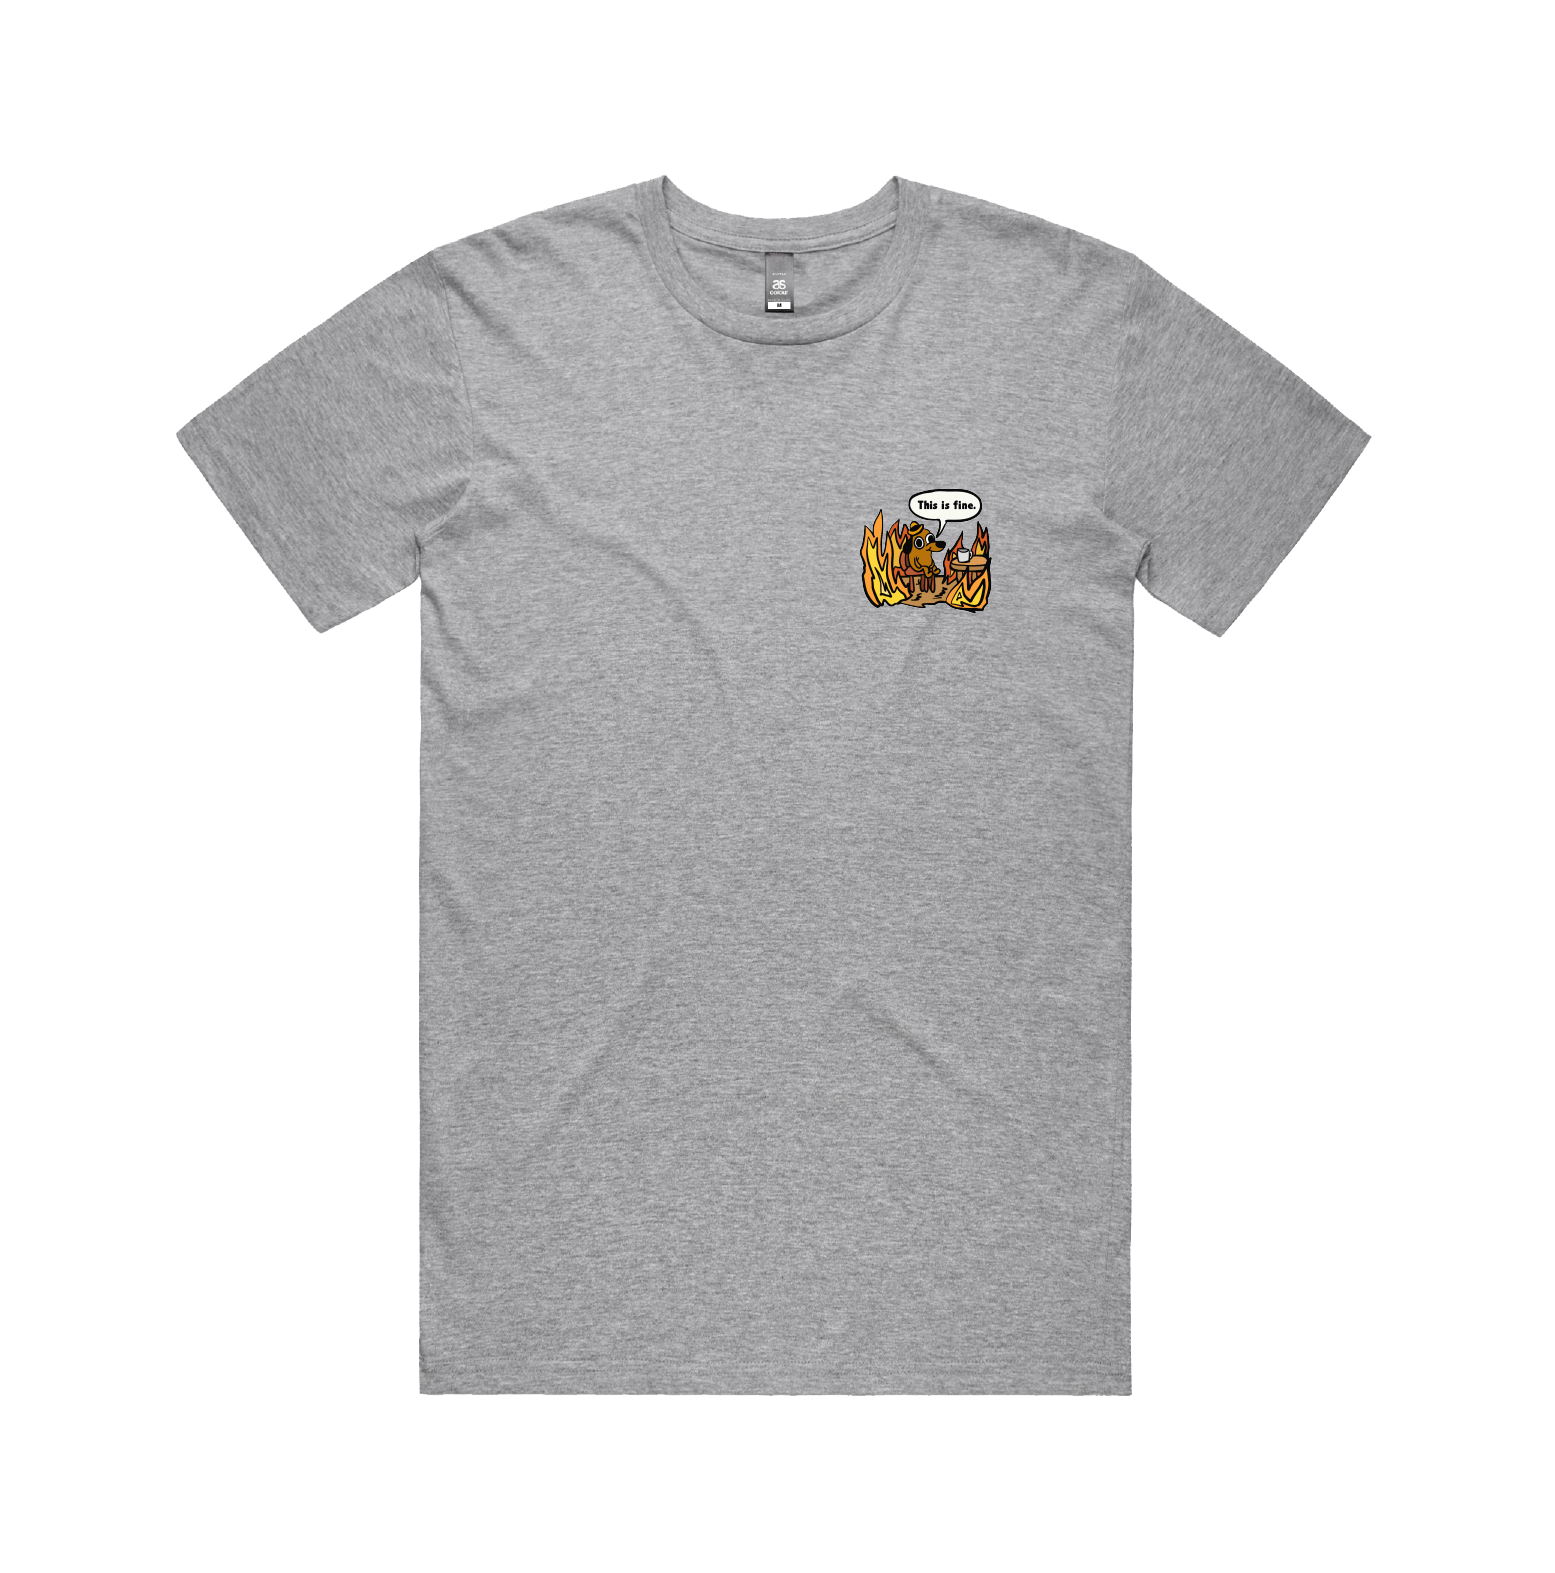 S / Grey / Small Front Design This Is Fine 🔥 - Men's T Shirt